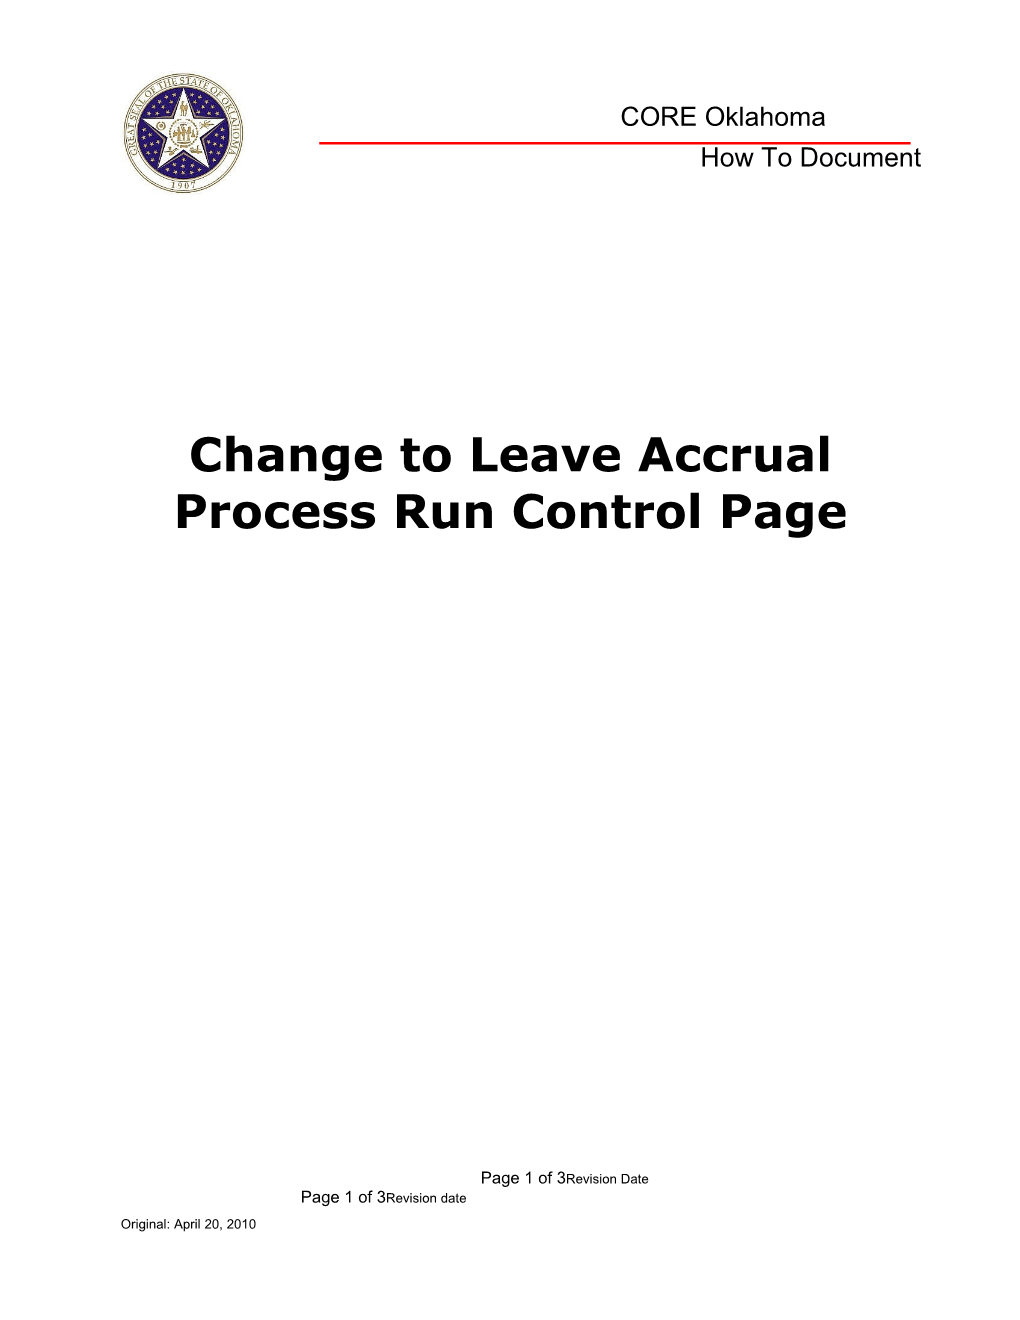 CORE How To: Change to Leave Accrual Process Run Control Page